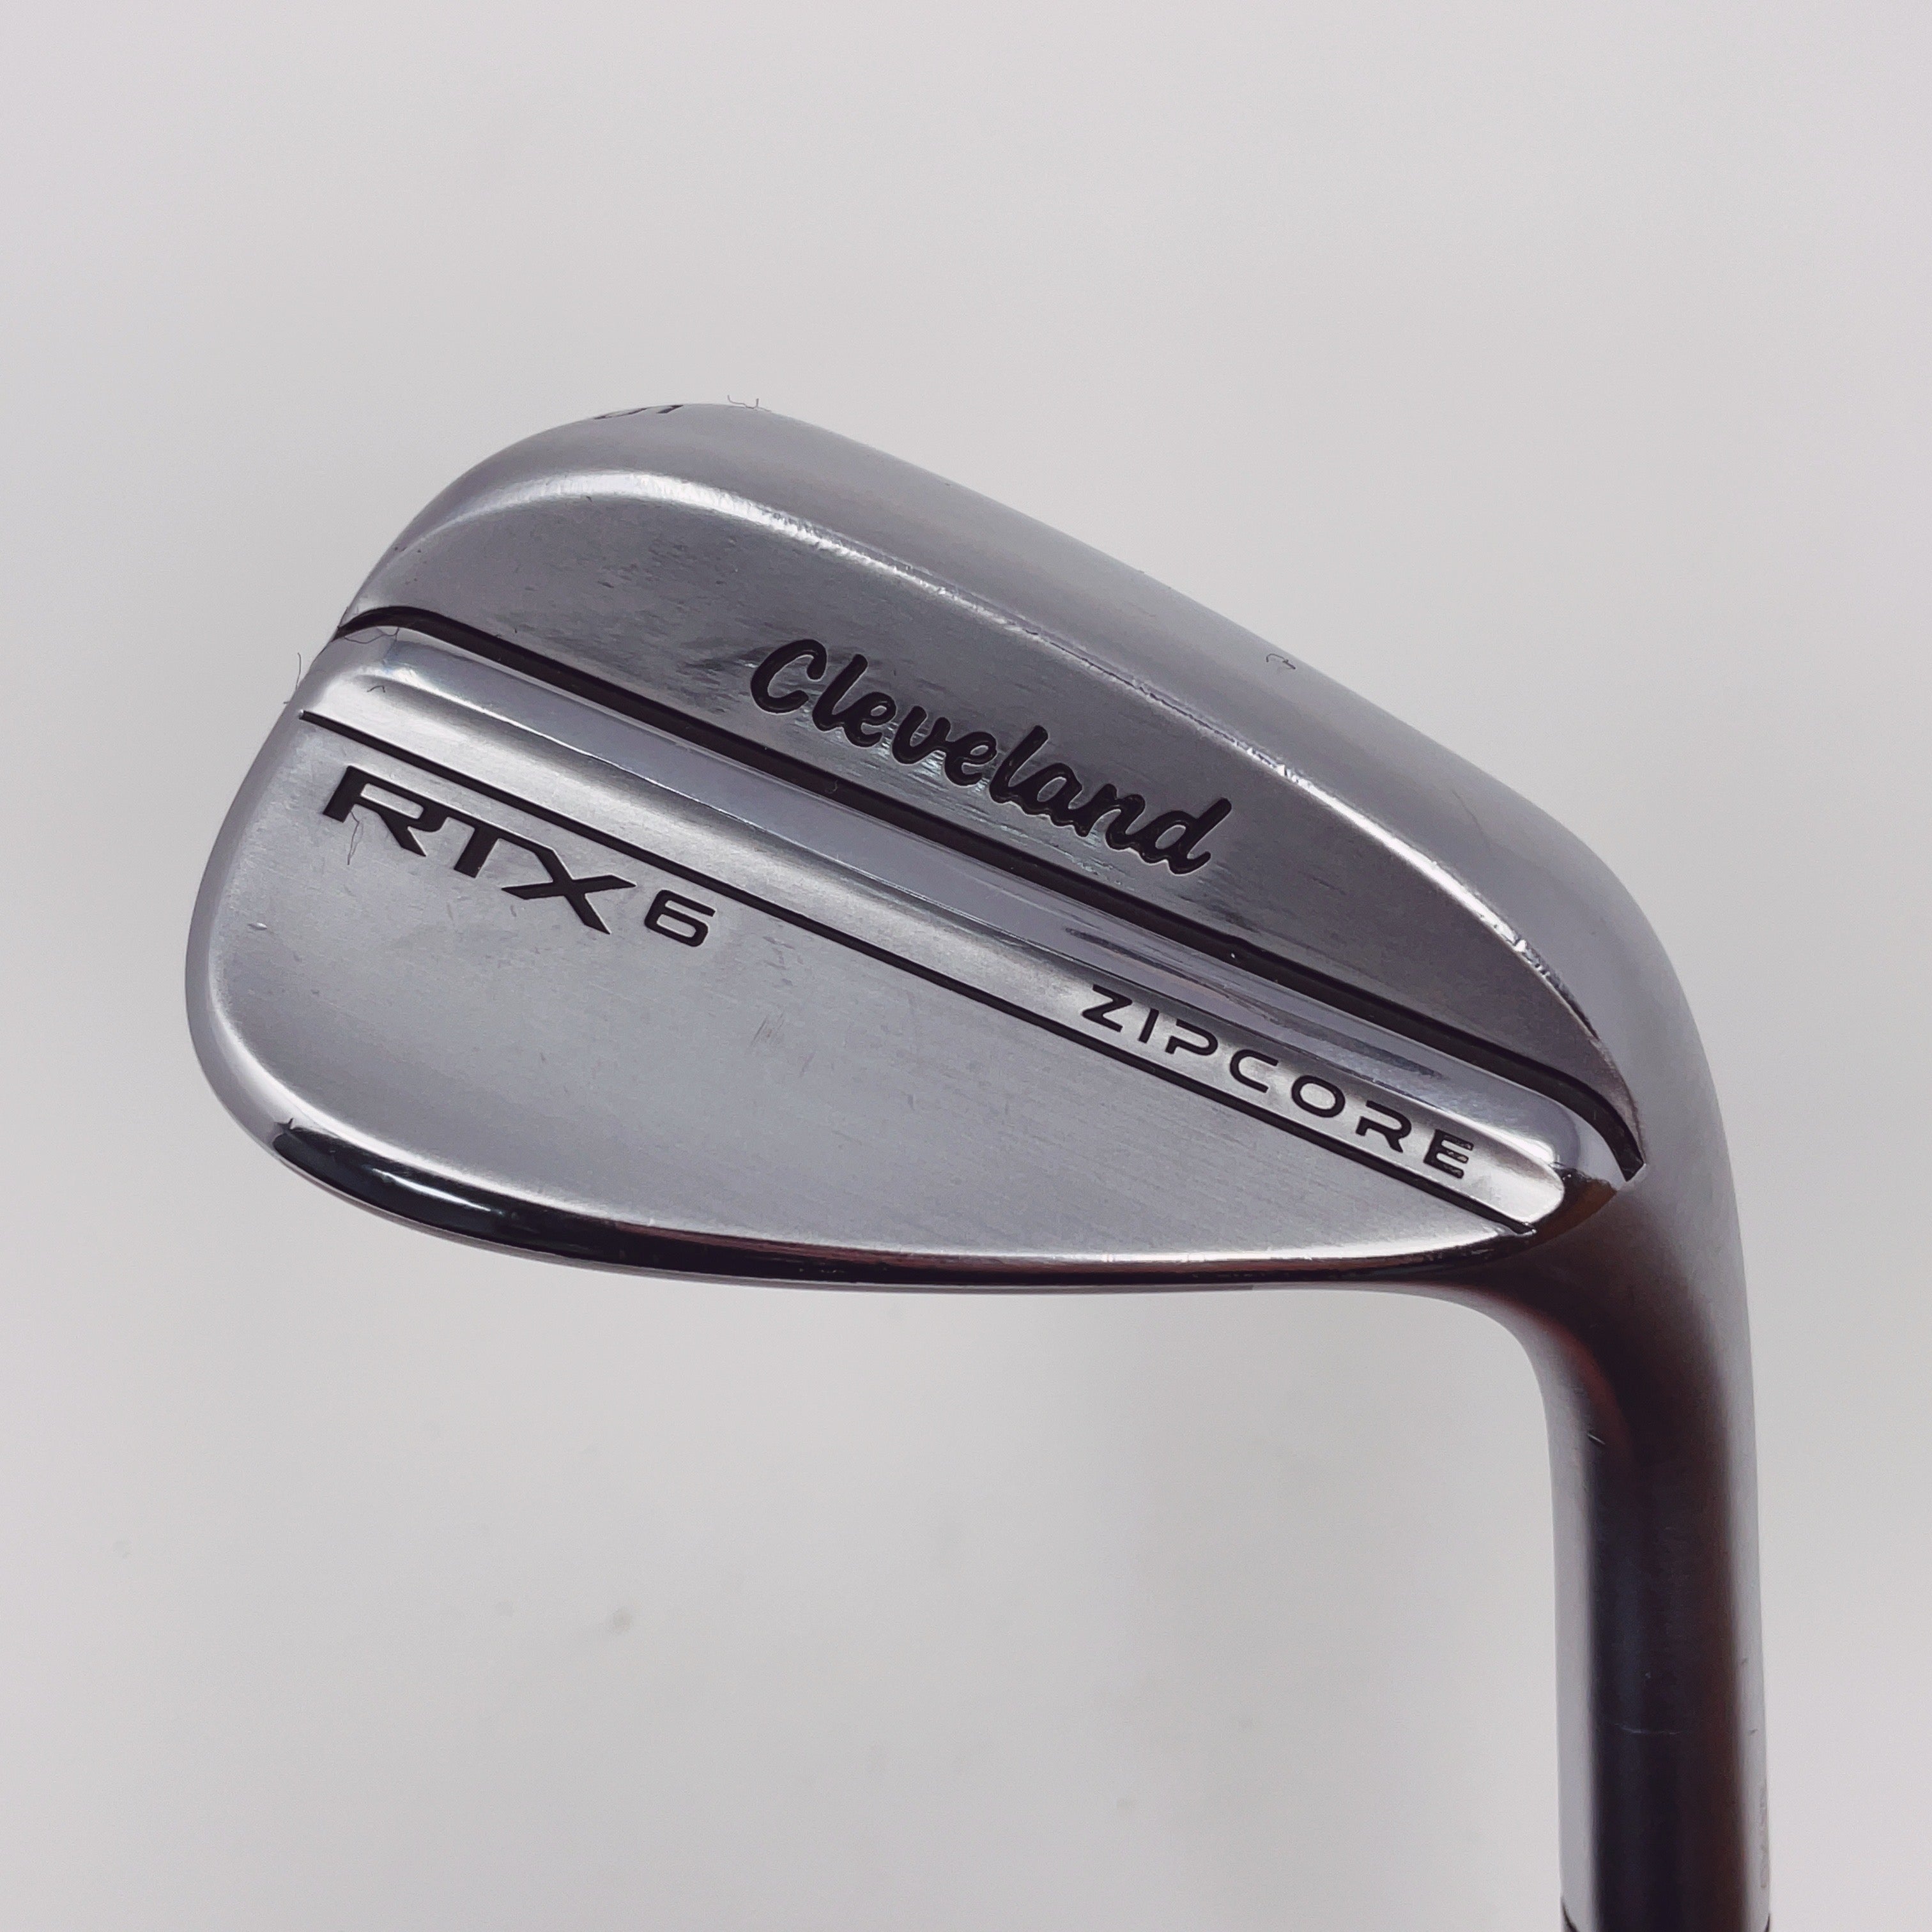 CLEVELAND ZIPCORE RTX6 WEDGE / 46 DEGREE / DYNAMIC GOLD TOUR ISSUE SPINNER SHAFT